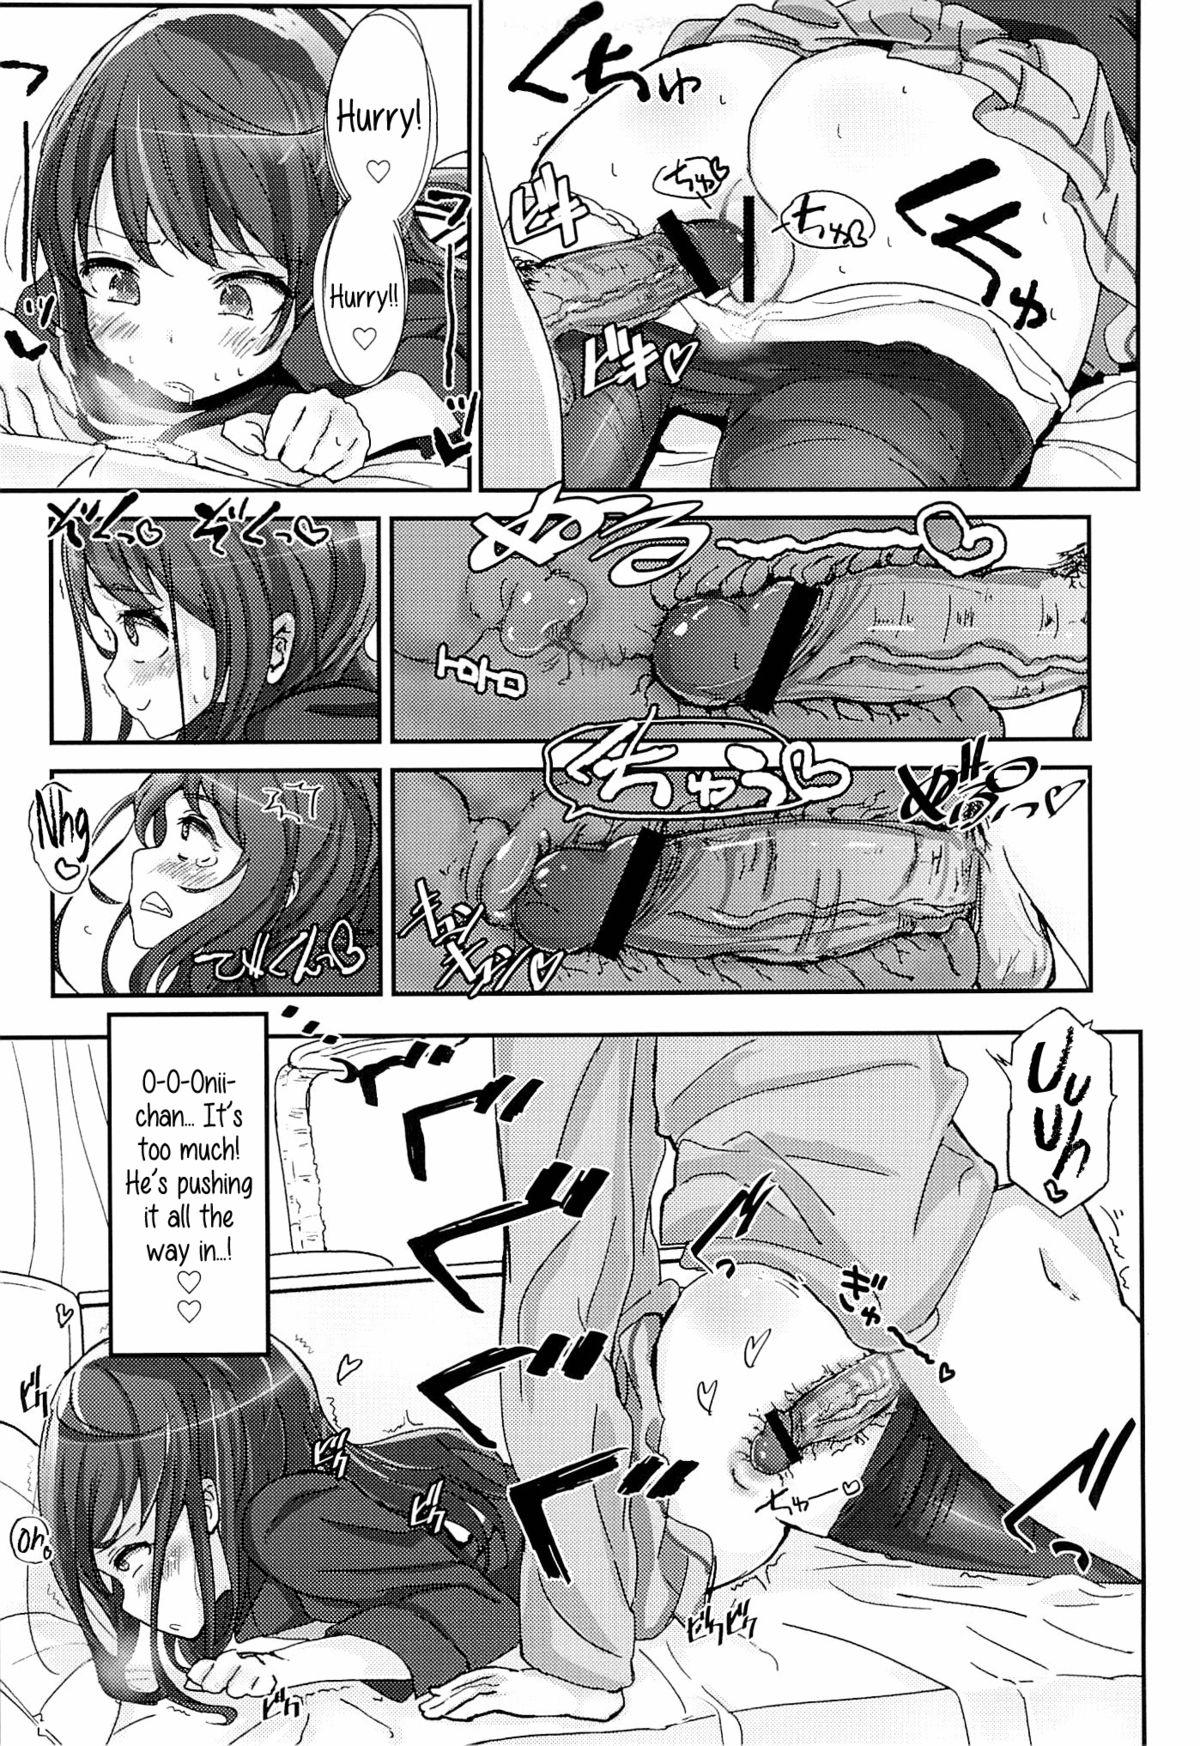 Picked Up Shikyuukou no Kanata, Onii chan no Hate | Beyond the mouth of the uterus lies Onii-chan’s demise Family Roleplay - Page 6